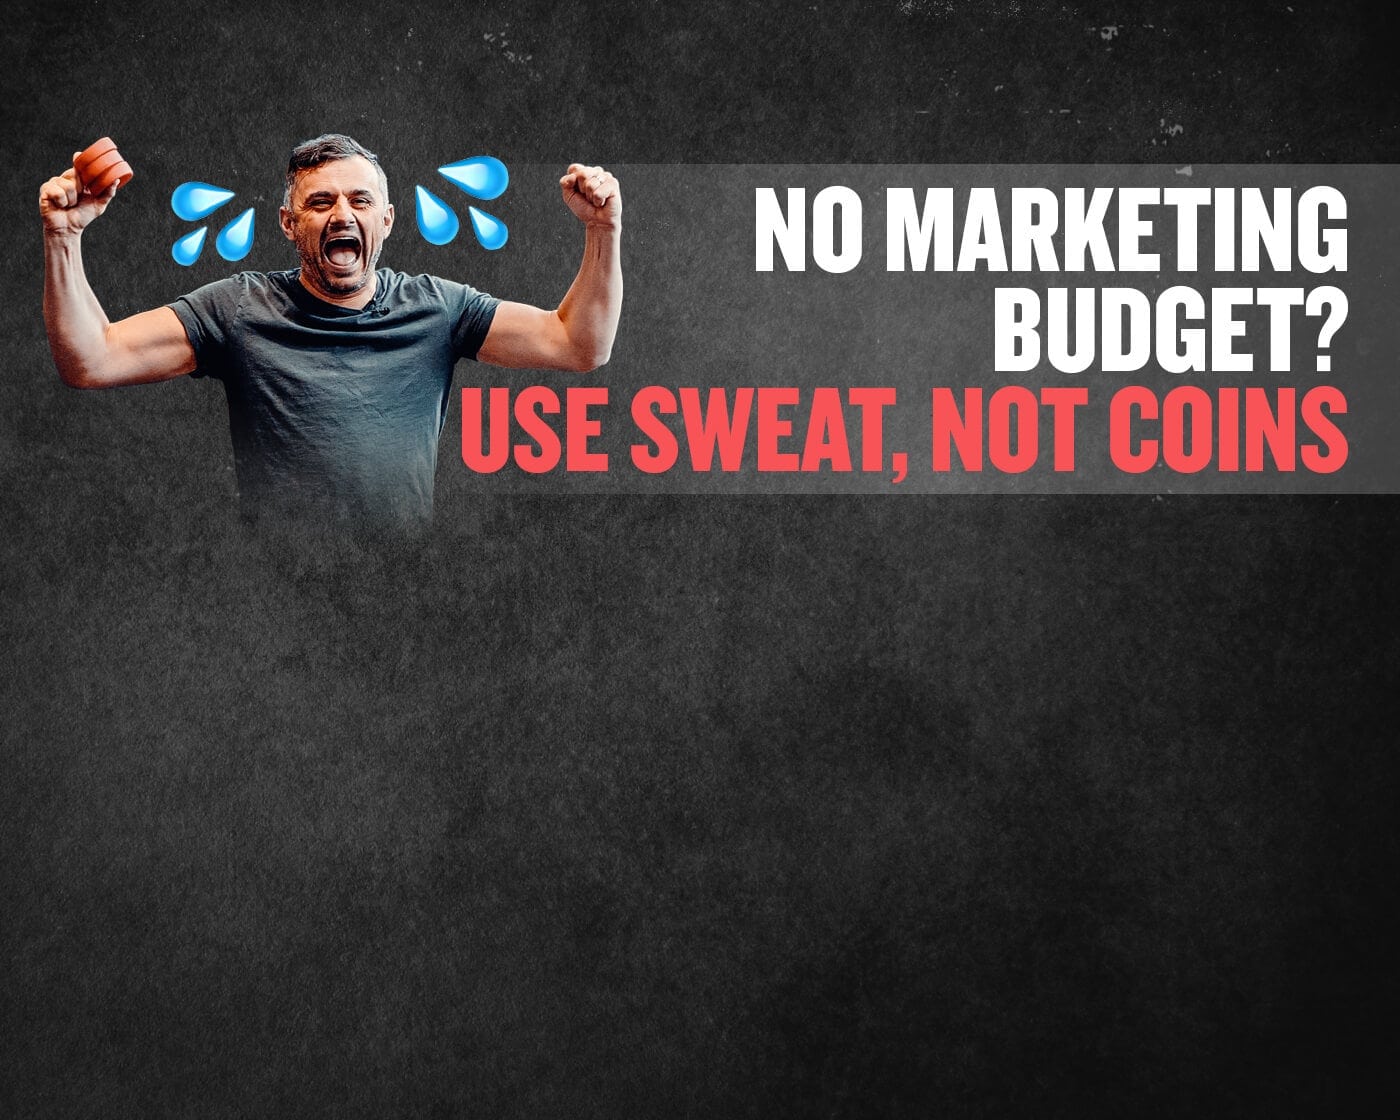 No Marketing Budget? Use Sweat, not Coins.